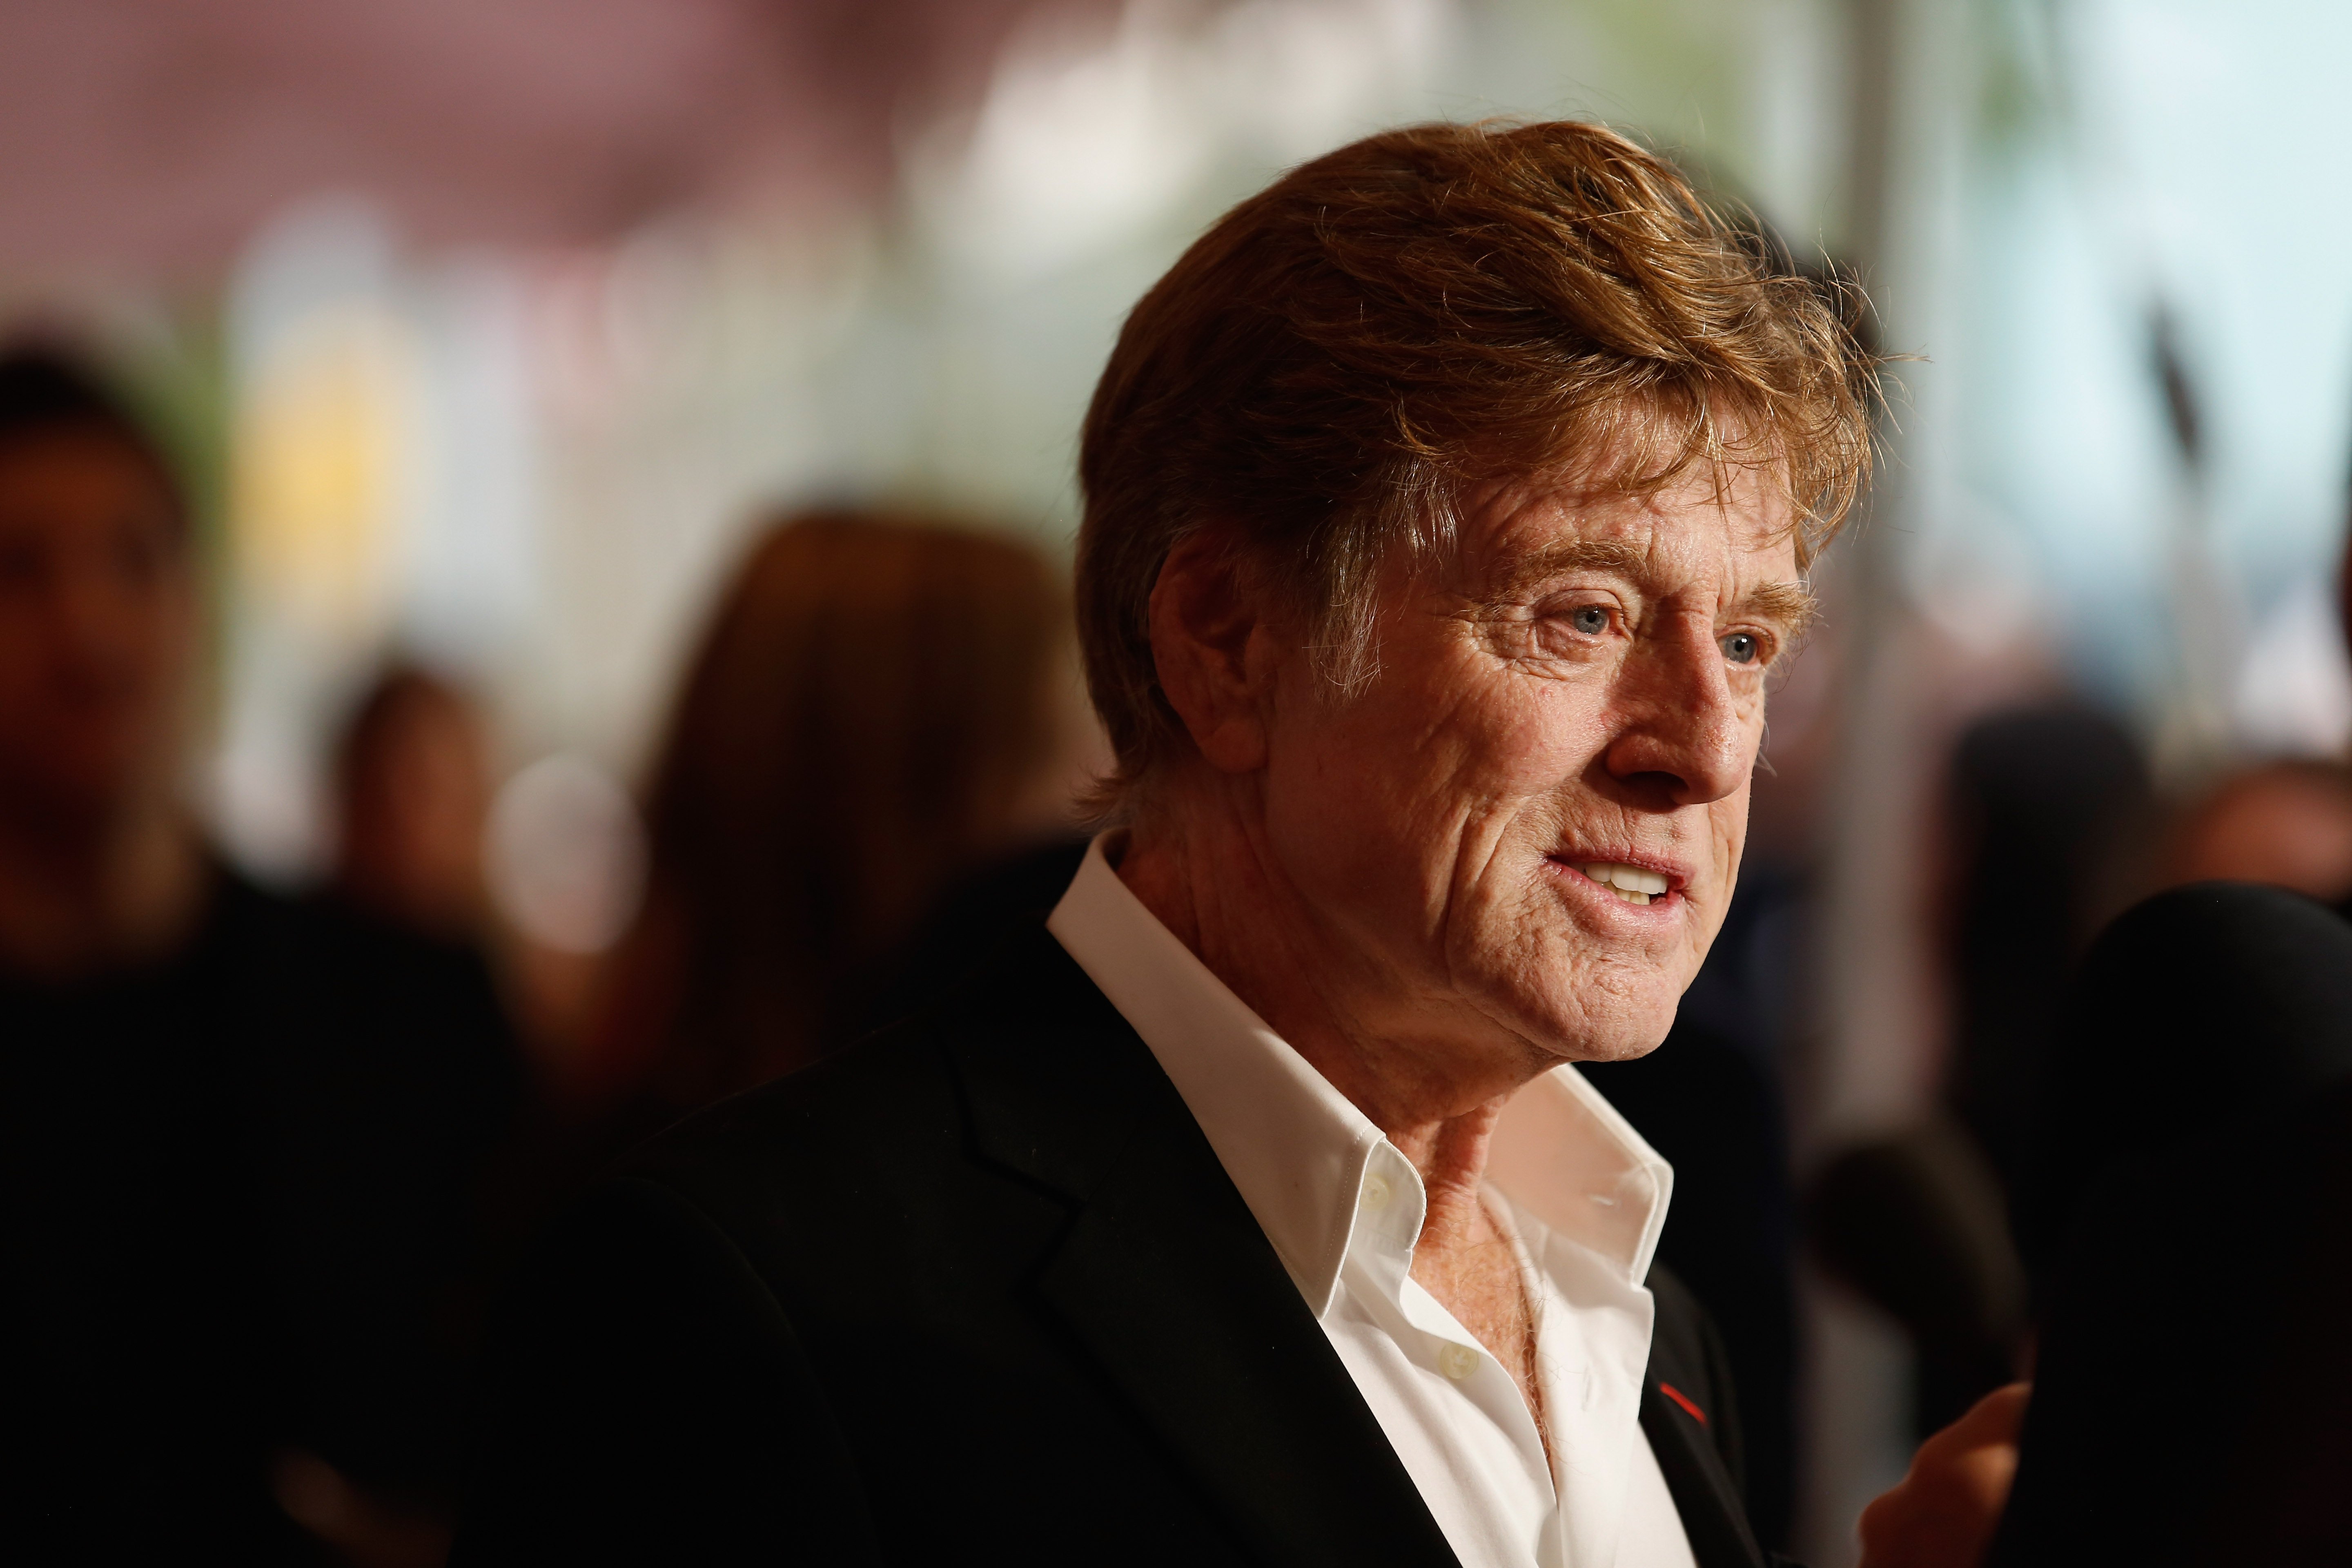 Robert Redford at Lincoln Center on October 8, 2013. | Photo: Getty Images